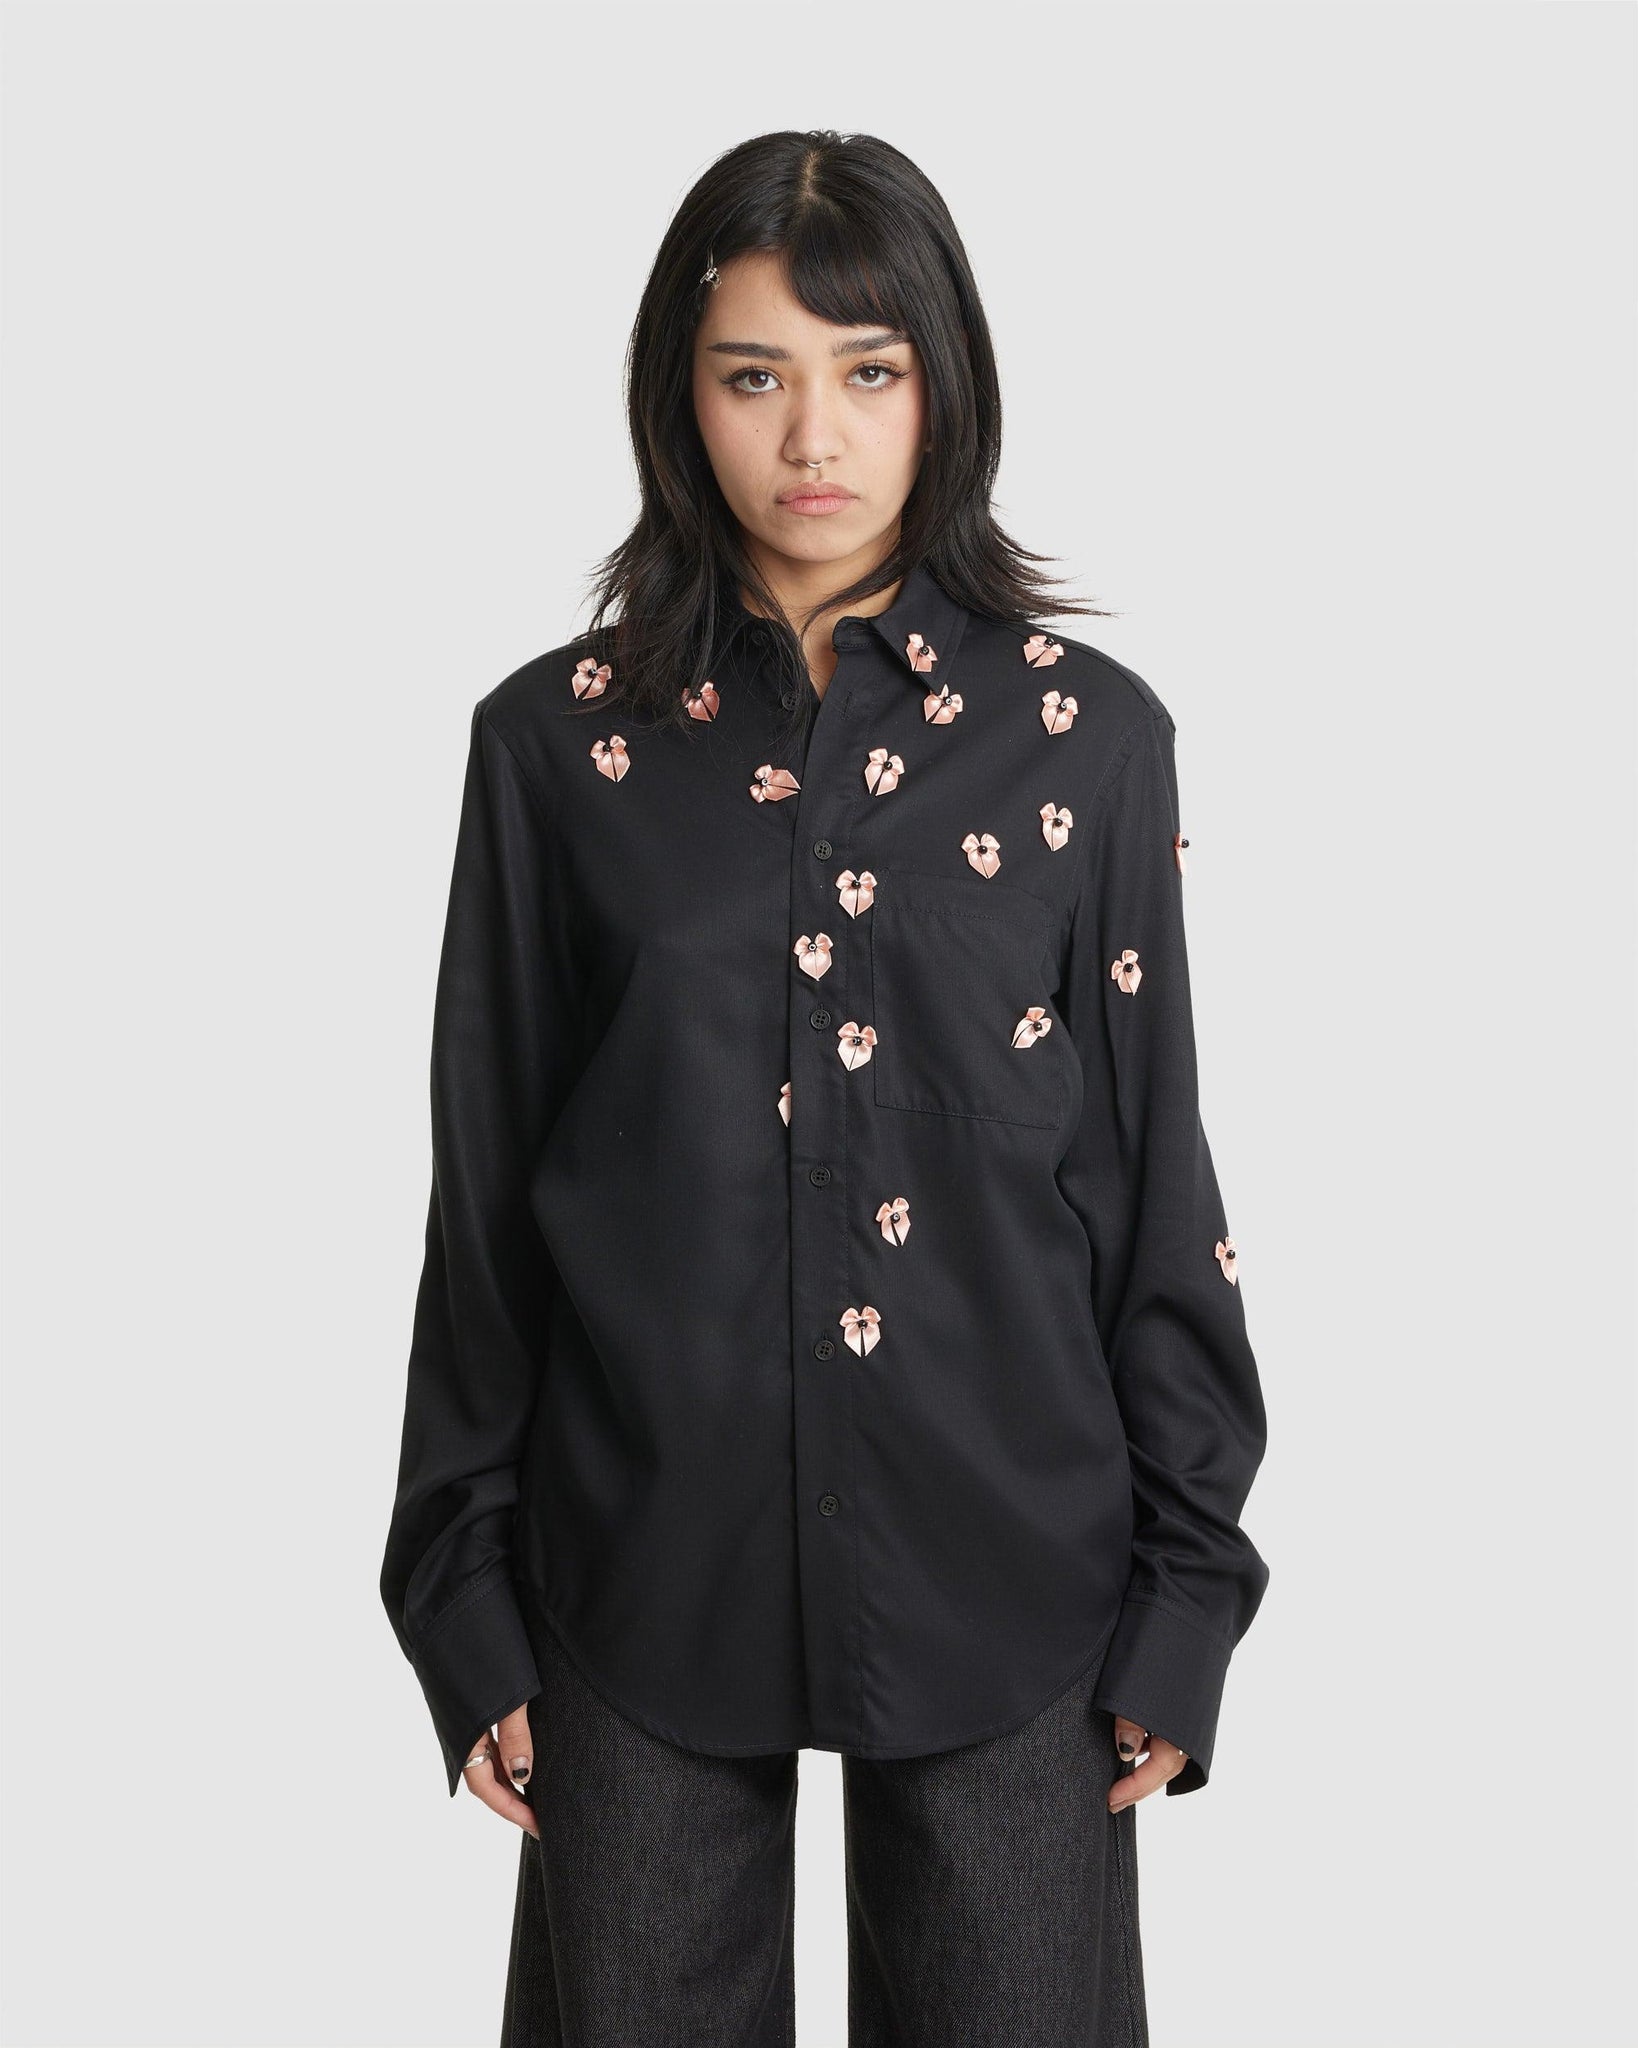 Aaren Shirt With Bows And Beads - {{ collection.title }} - Chinatown Country Club 